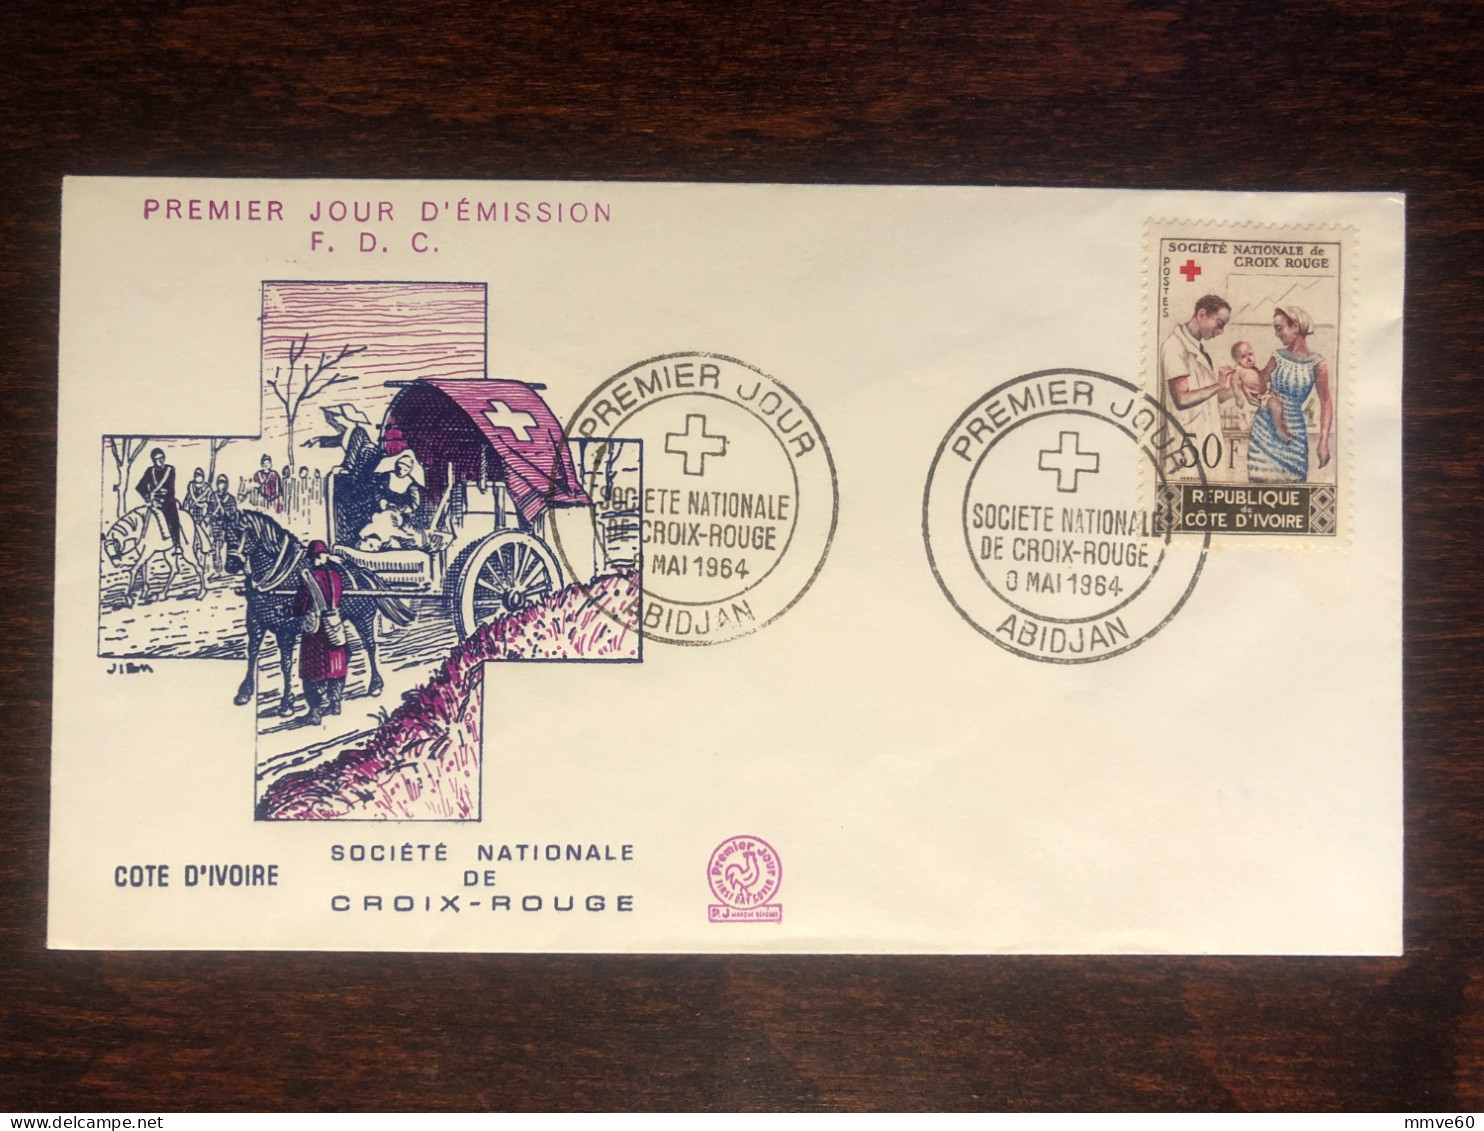 IVORY COAST COTE D’IVOIRE FDC COVER 1964 YEAR RED CROSS VACCINATION HEALTH MEDICINE STAMPS - Côte D'Ivoire (1960-...)